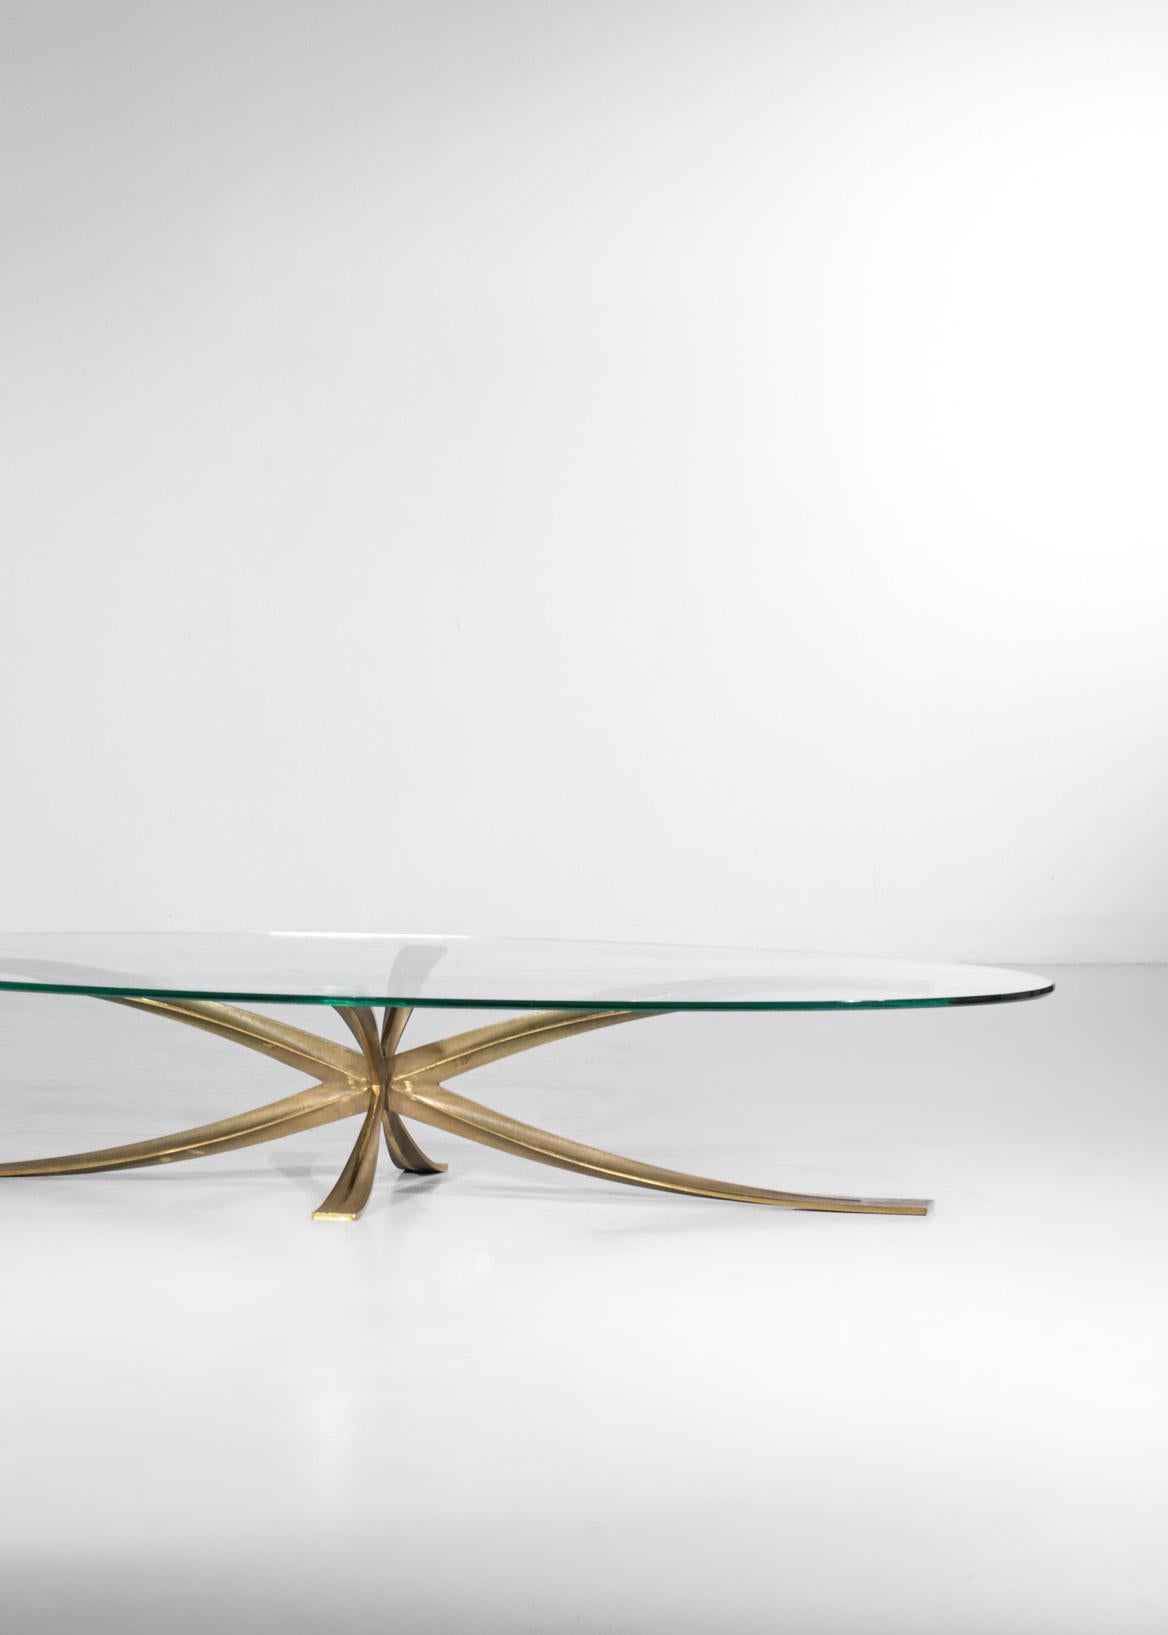 Large Michel Mangematin Coffee Table in Gilt Bronze and Oval Glass 1960's Design For Sale 1